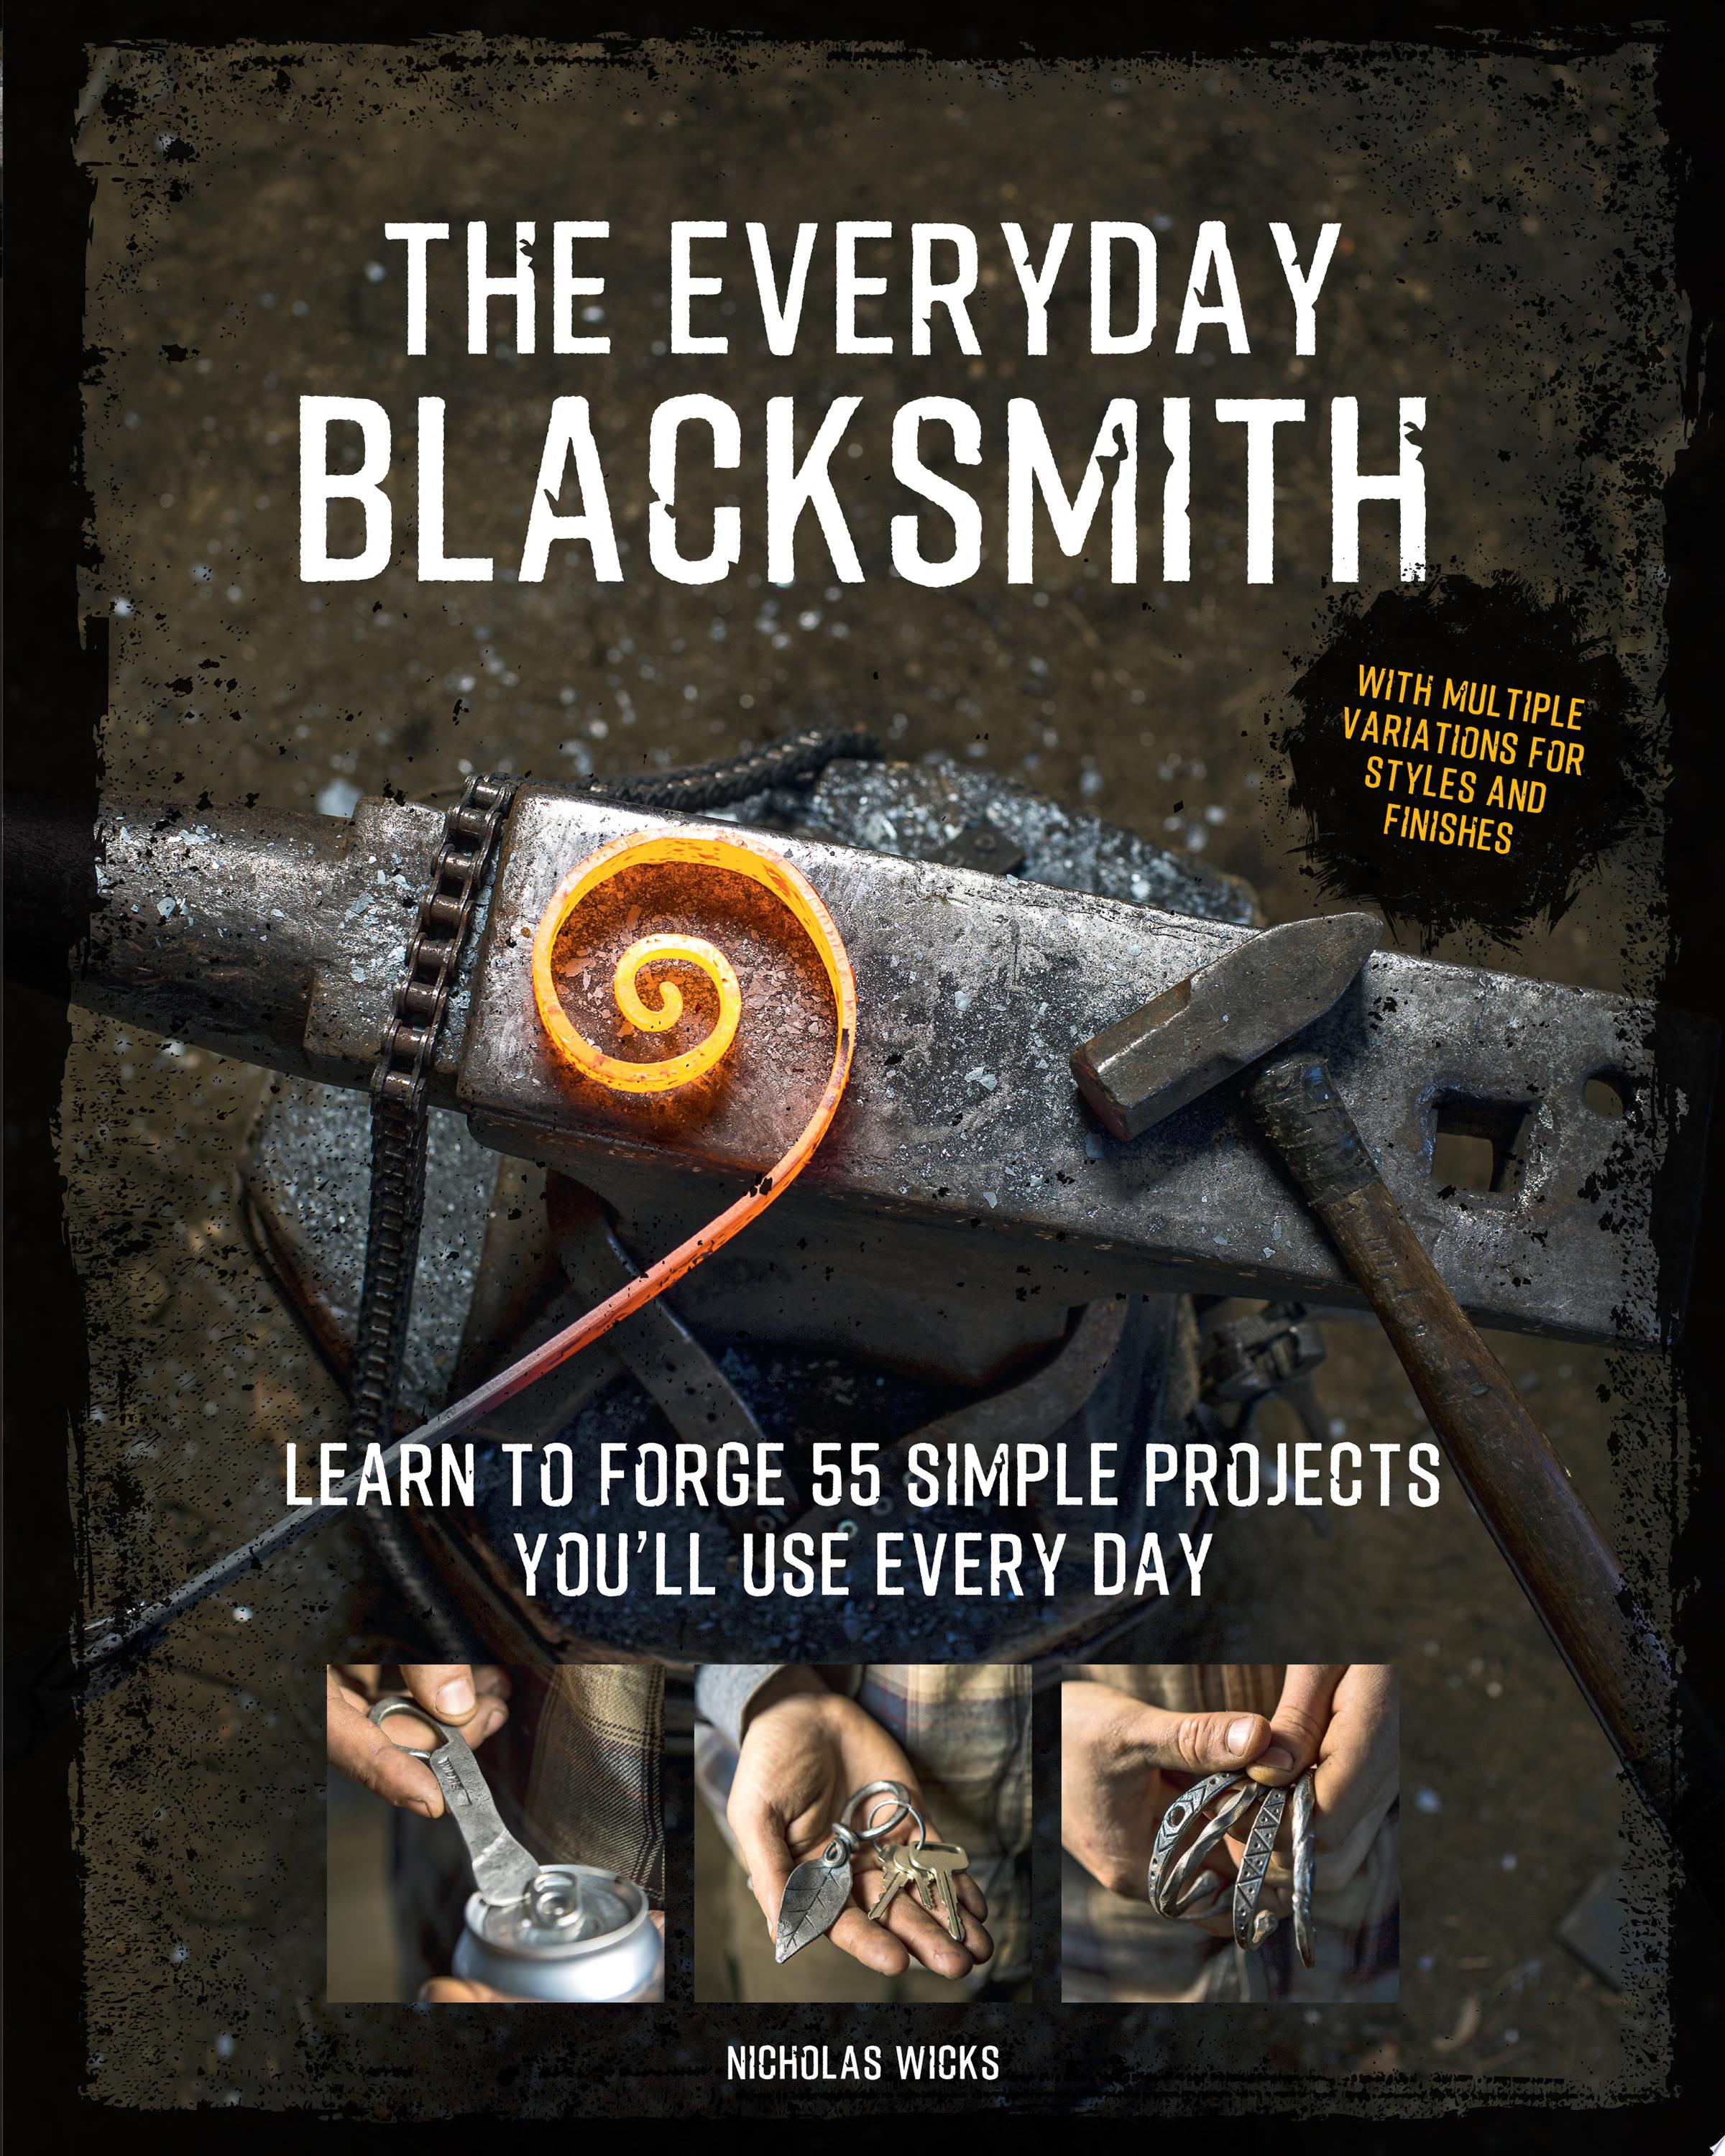 Image for "The Everyday Blacksmith"